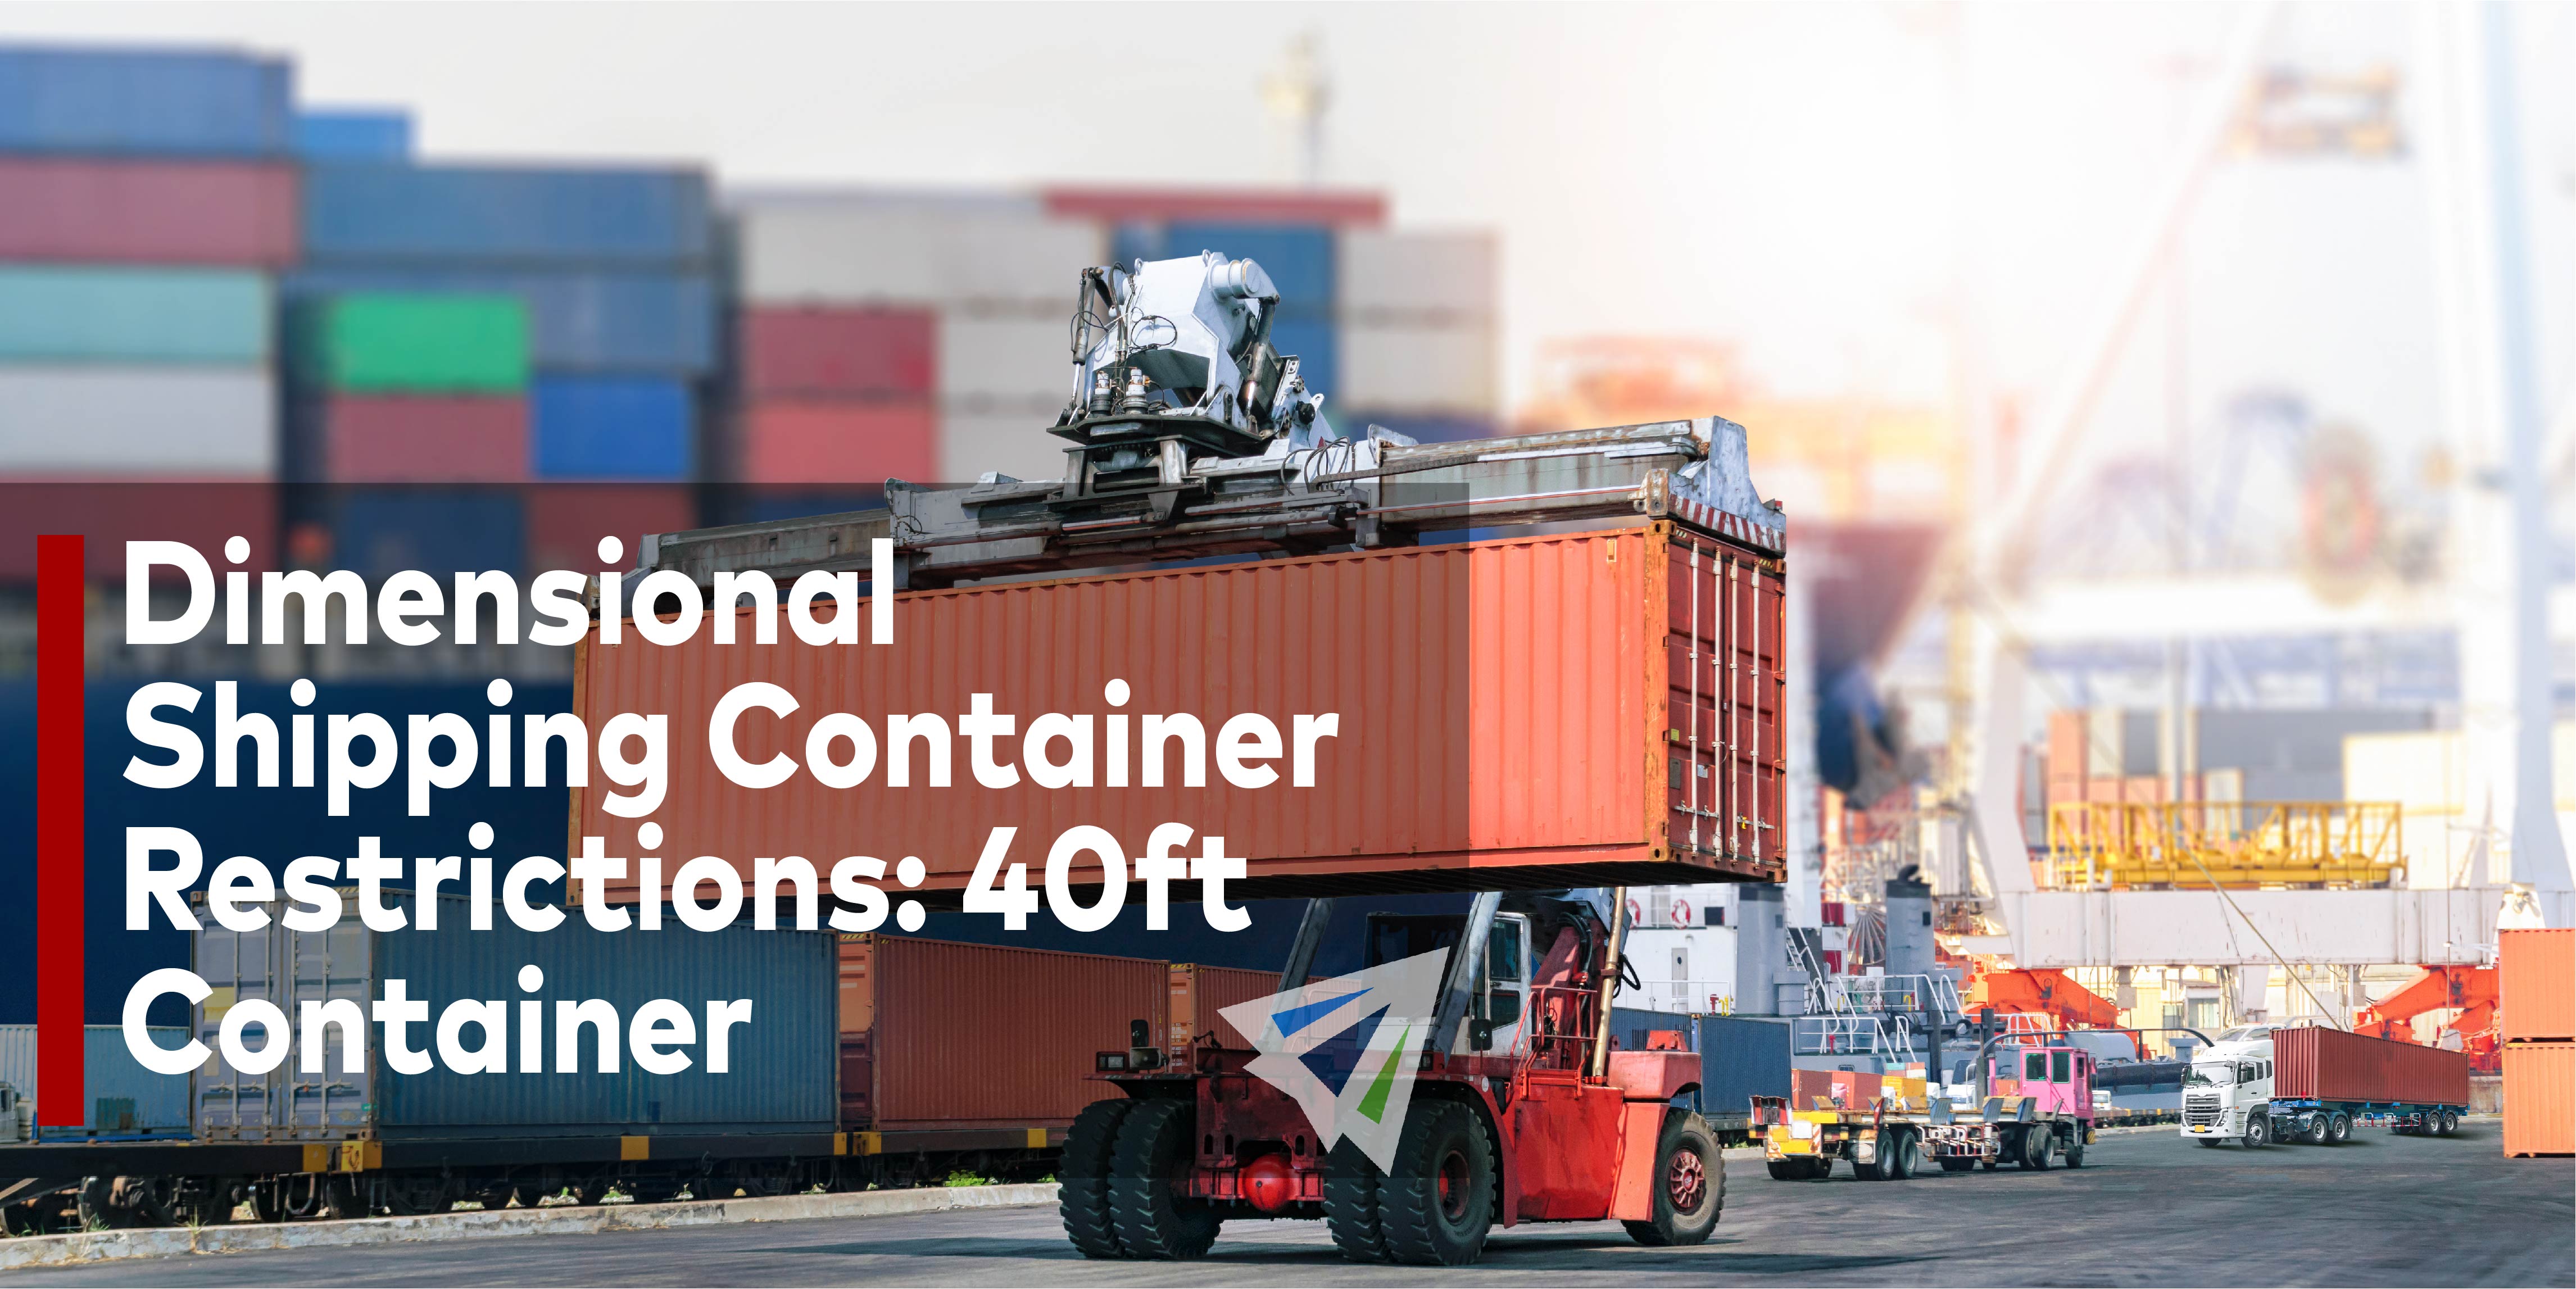 Dimensional Shipping Container Restrictions Part 2: 40ft Containers